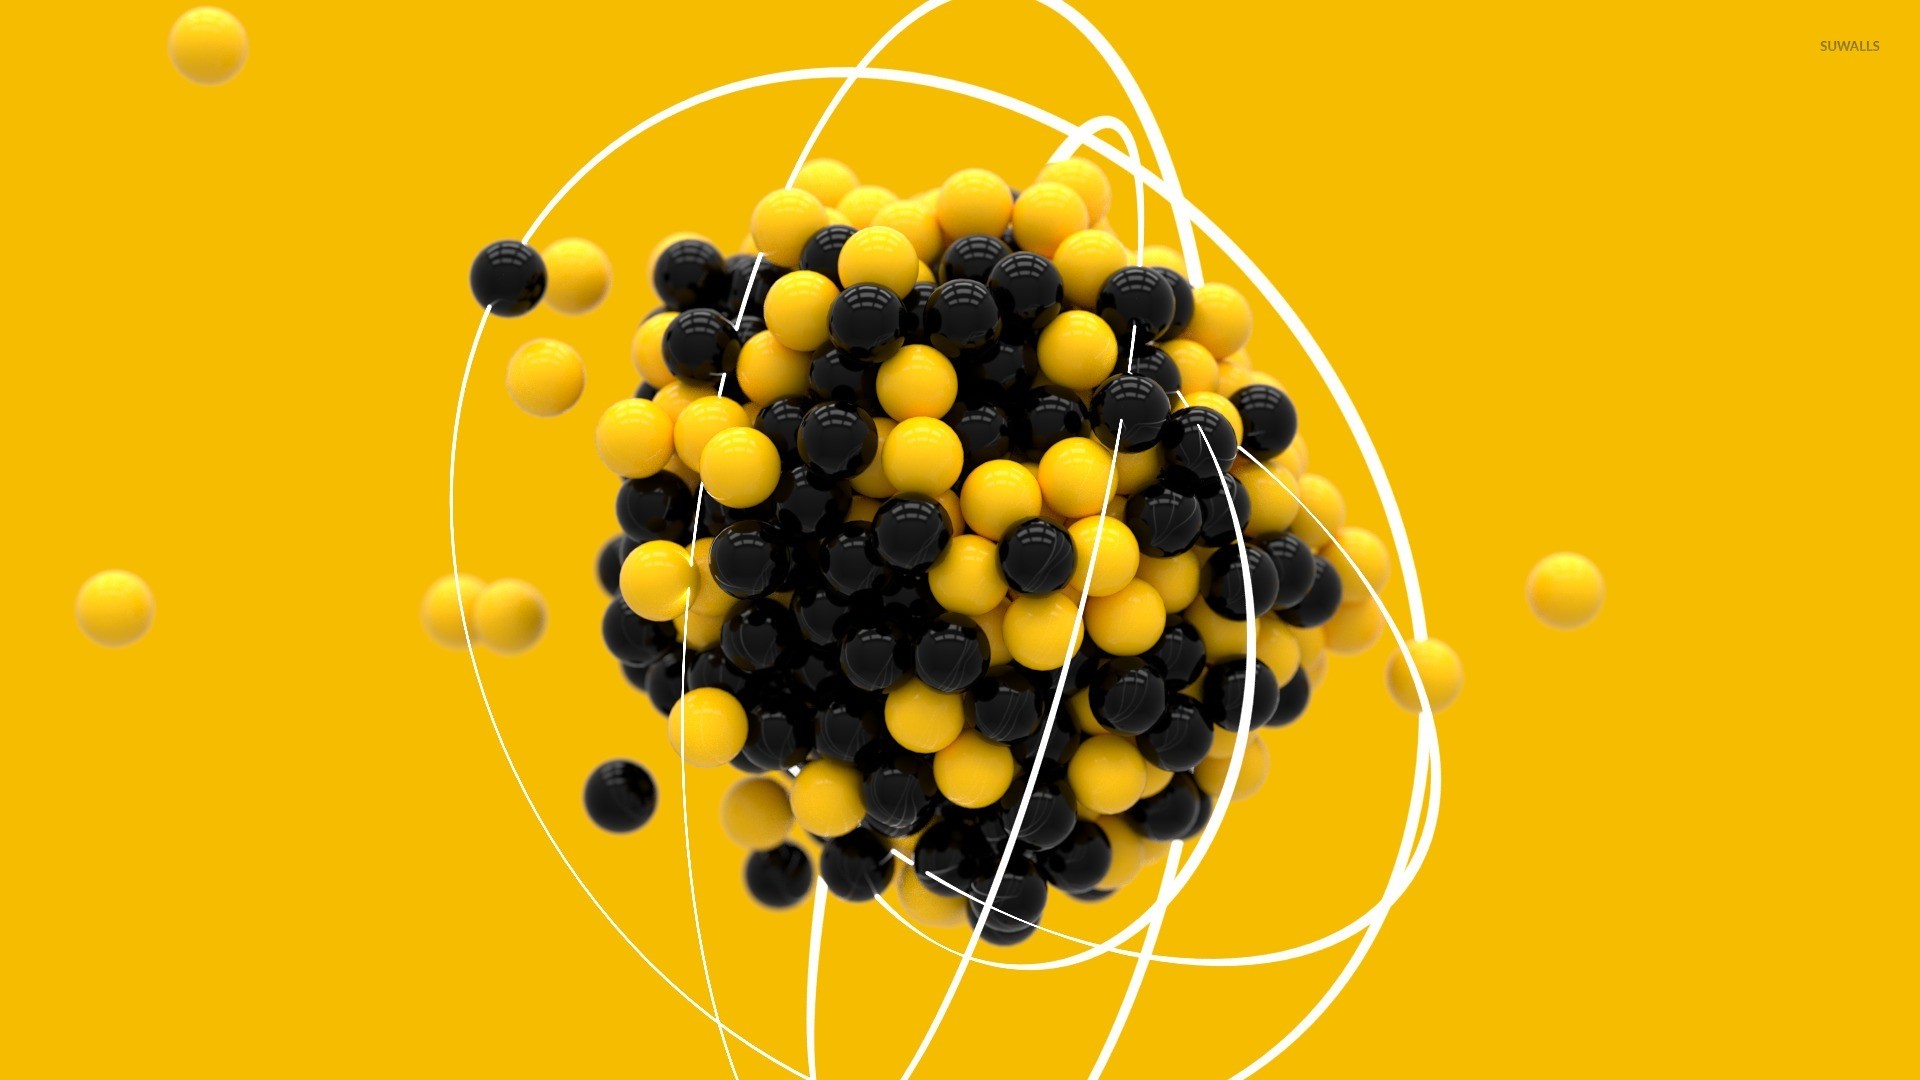 1920x1080 Black and yellow spheres wallpaper - 3D wallpapers - #28956